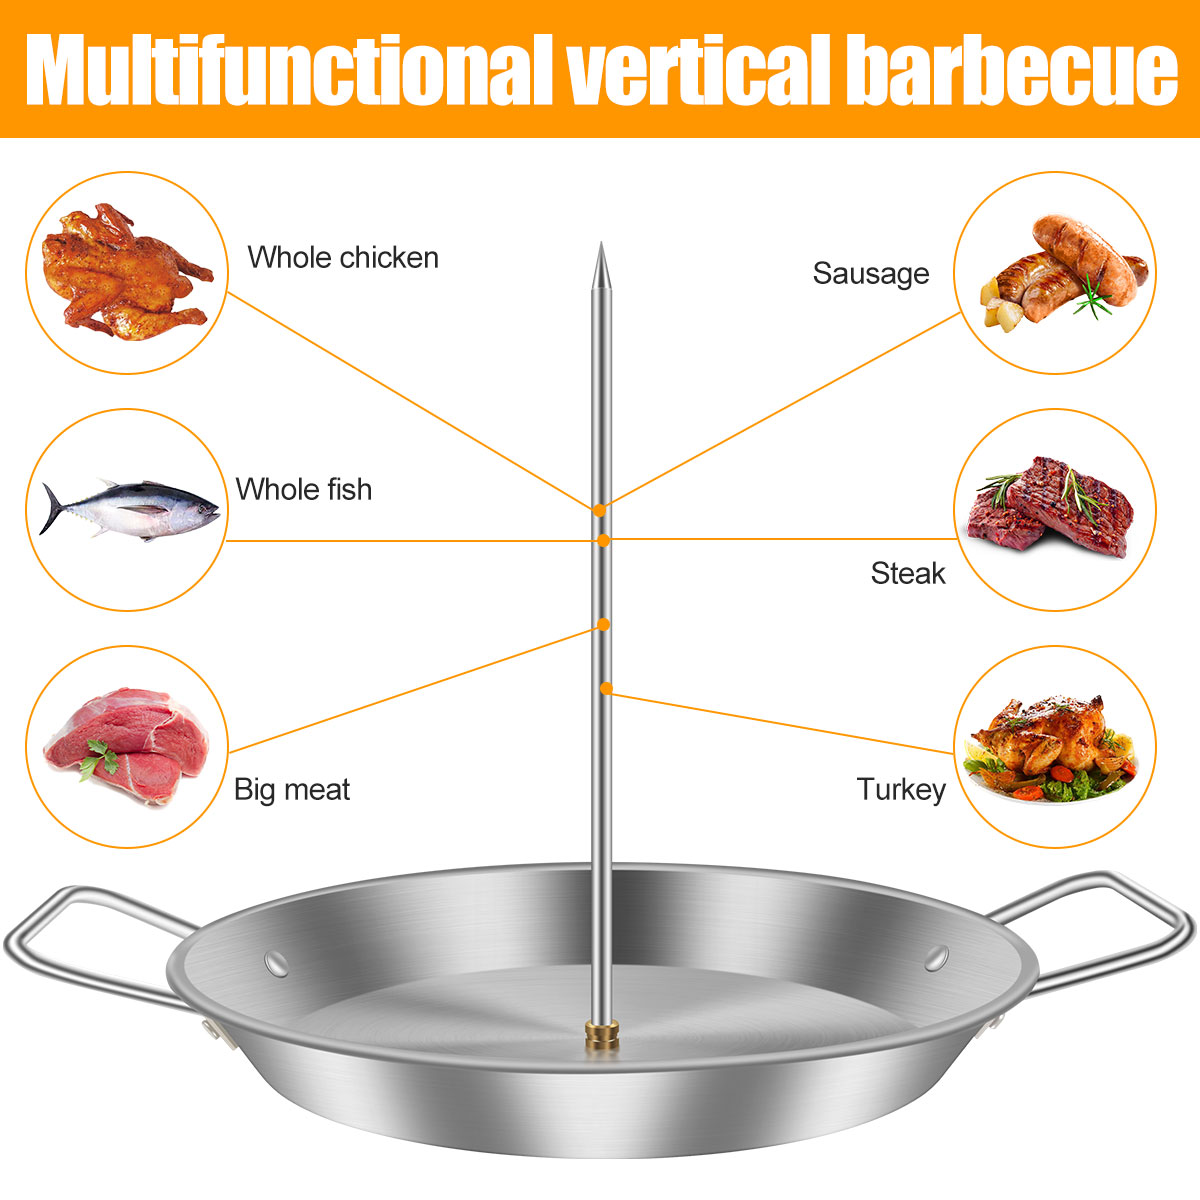 Kuphy Vertical Meat Skewer Stainless Steel BBQ Vertical Skewer Grill with 3 Replacement Spikes Barbecue Vertical Skewer Grill Rack Stand with Handle for Whole Chicken Fish Sausage Steak - image 3 of 8